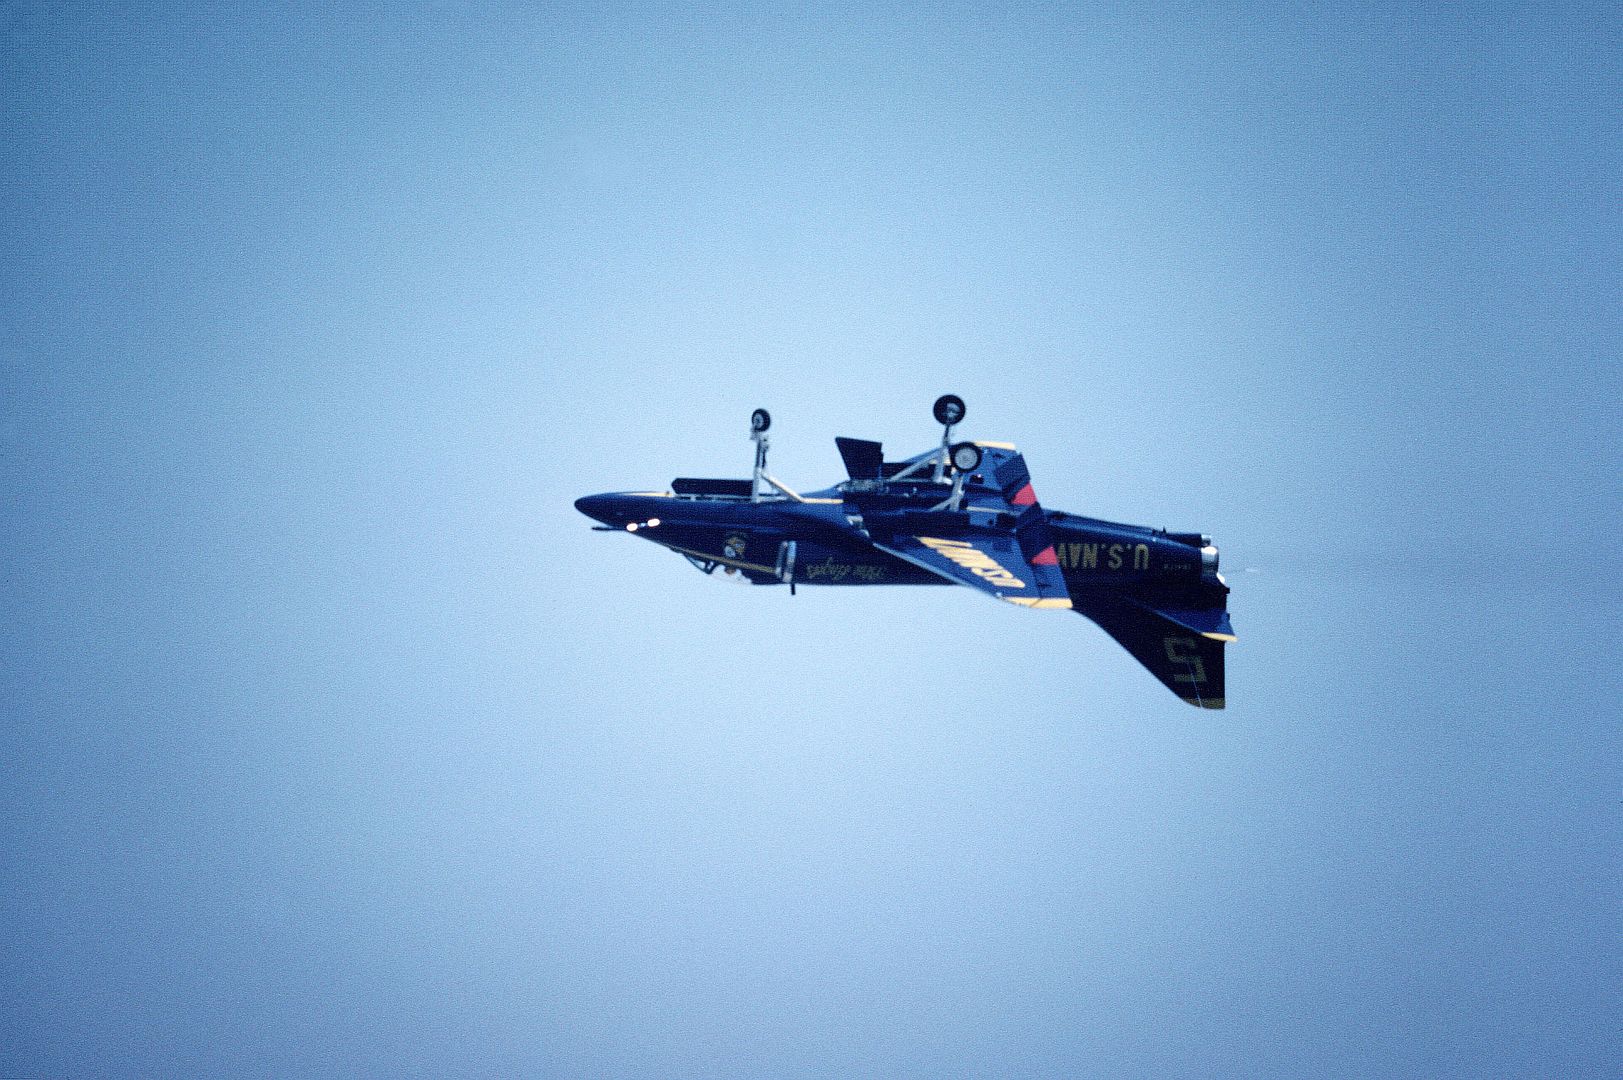 S Blue Angels Flight Demonstration Team Performs During The Air Show